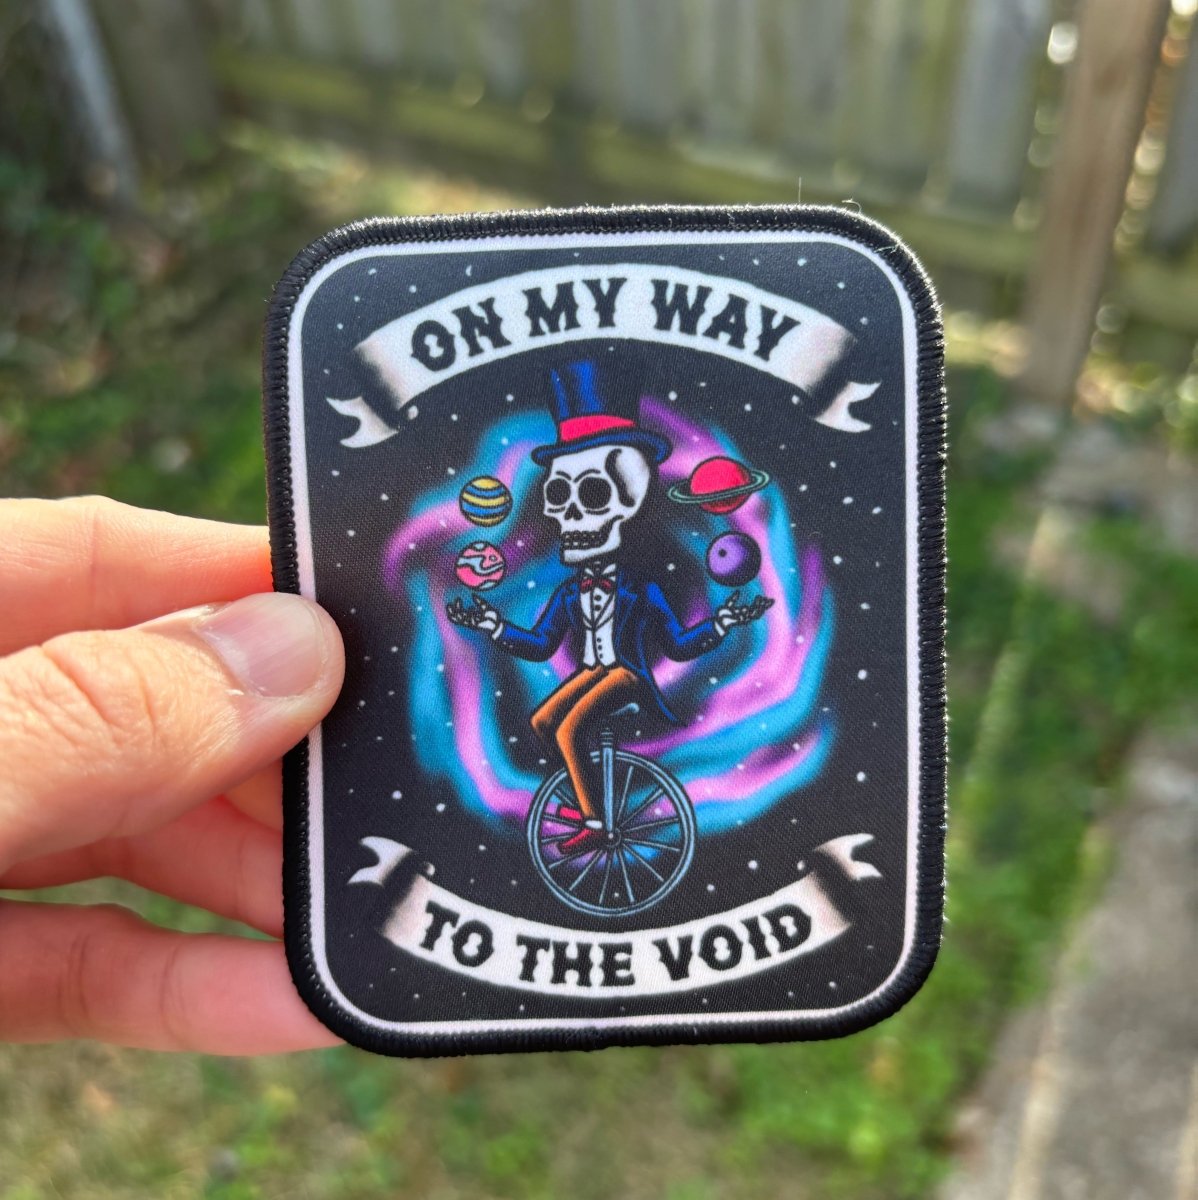 On my way to the void patch - Patch - Pretty Bad Co.